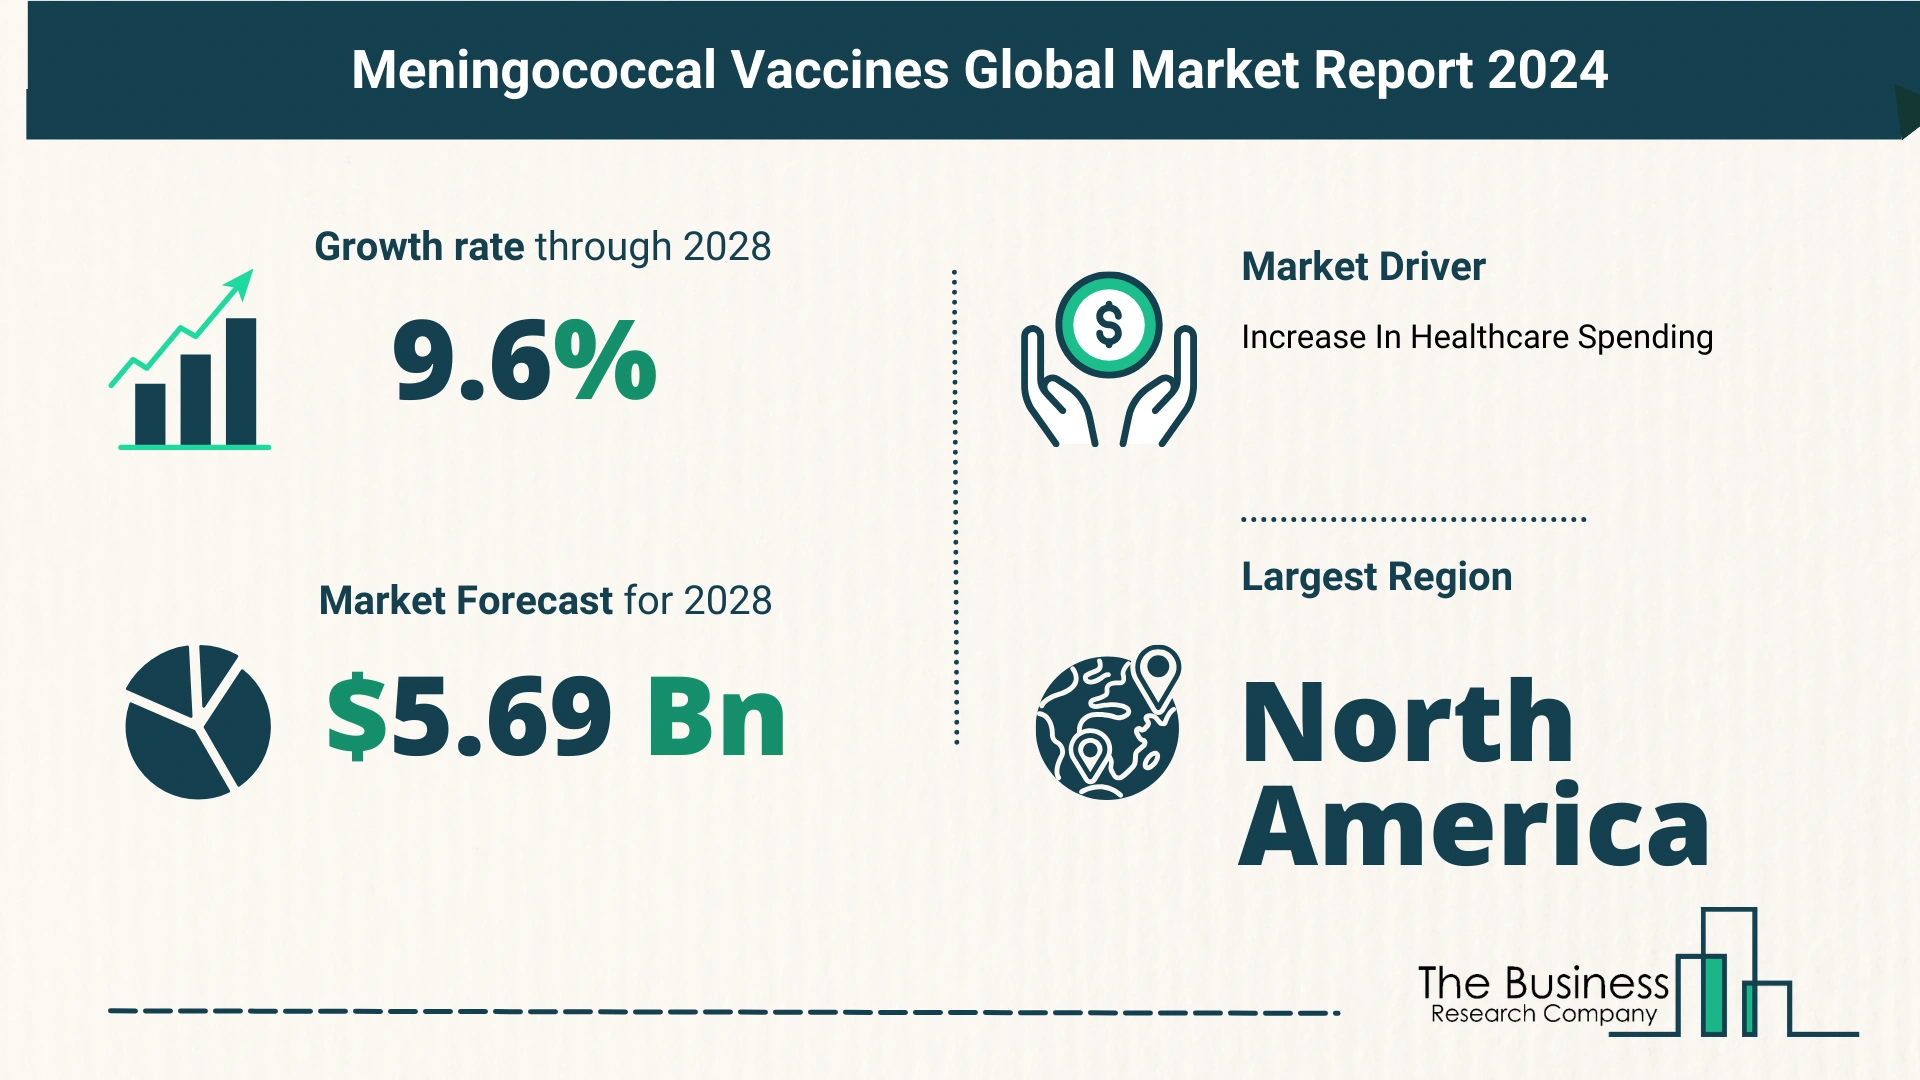 What Is The Forecast Growth Rate For The Meningococcal Vaccines Market?